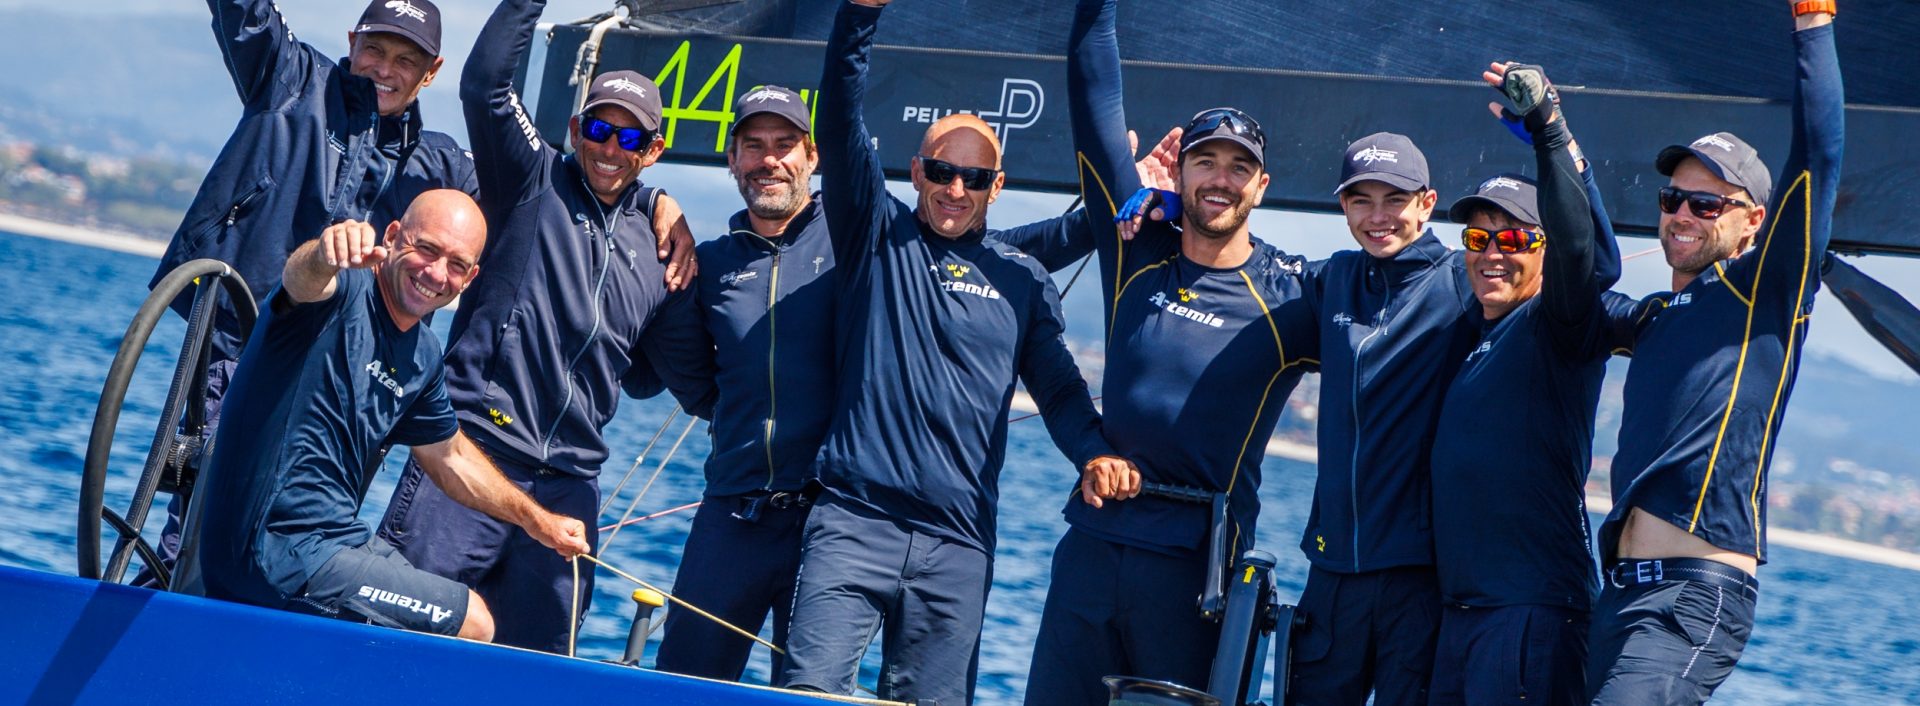 First event win for Artemis Racing in eight long years